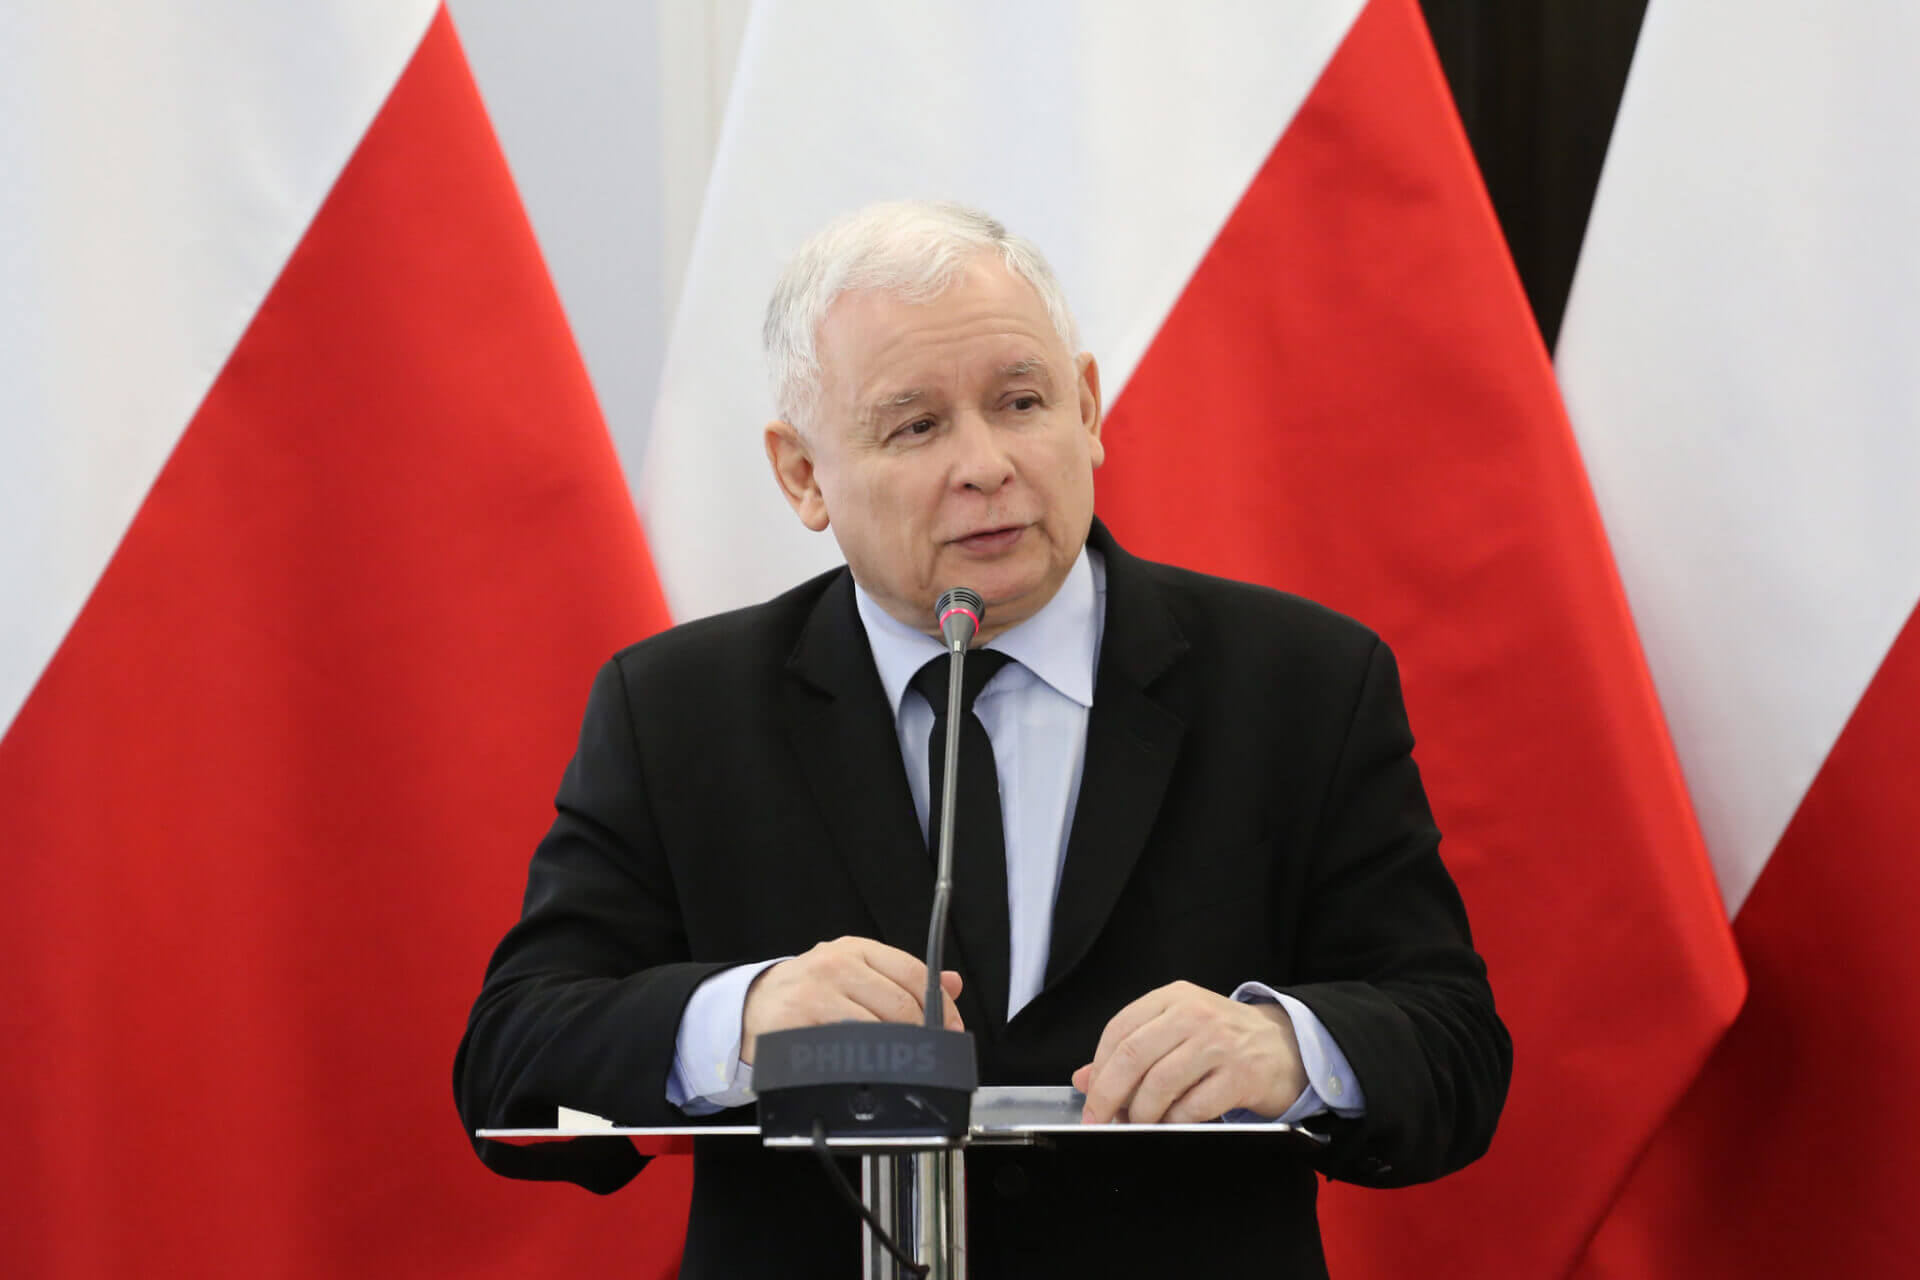 ‘No Choice But to Open Fire’, Says Poland on Rule of Law Dispute With EU